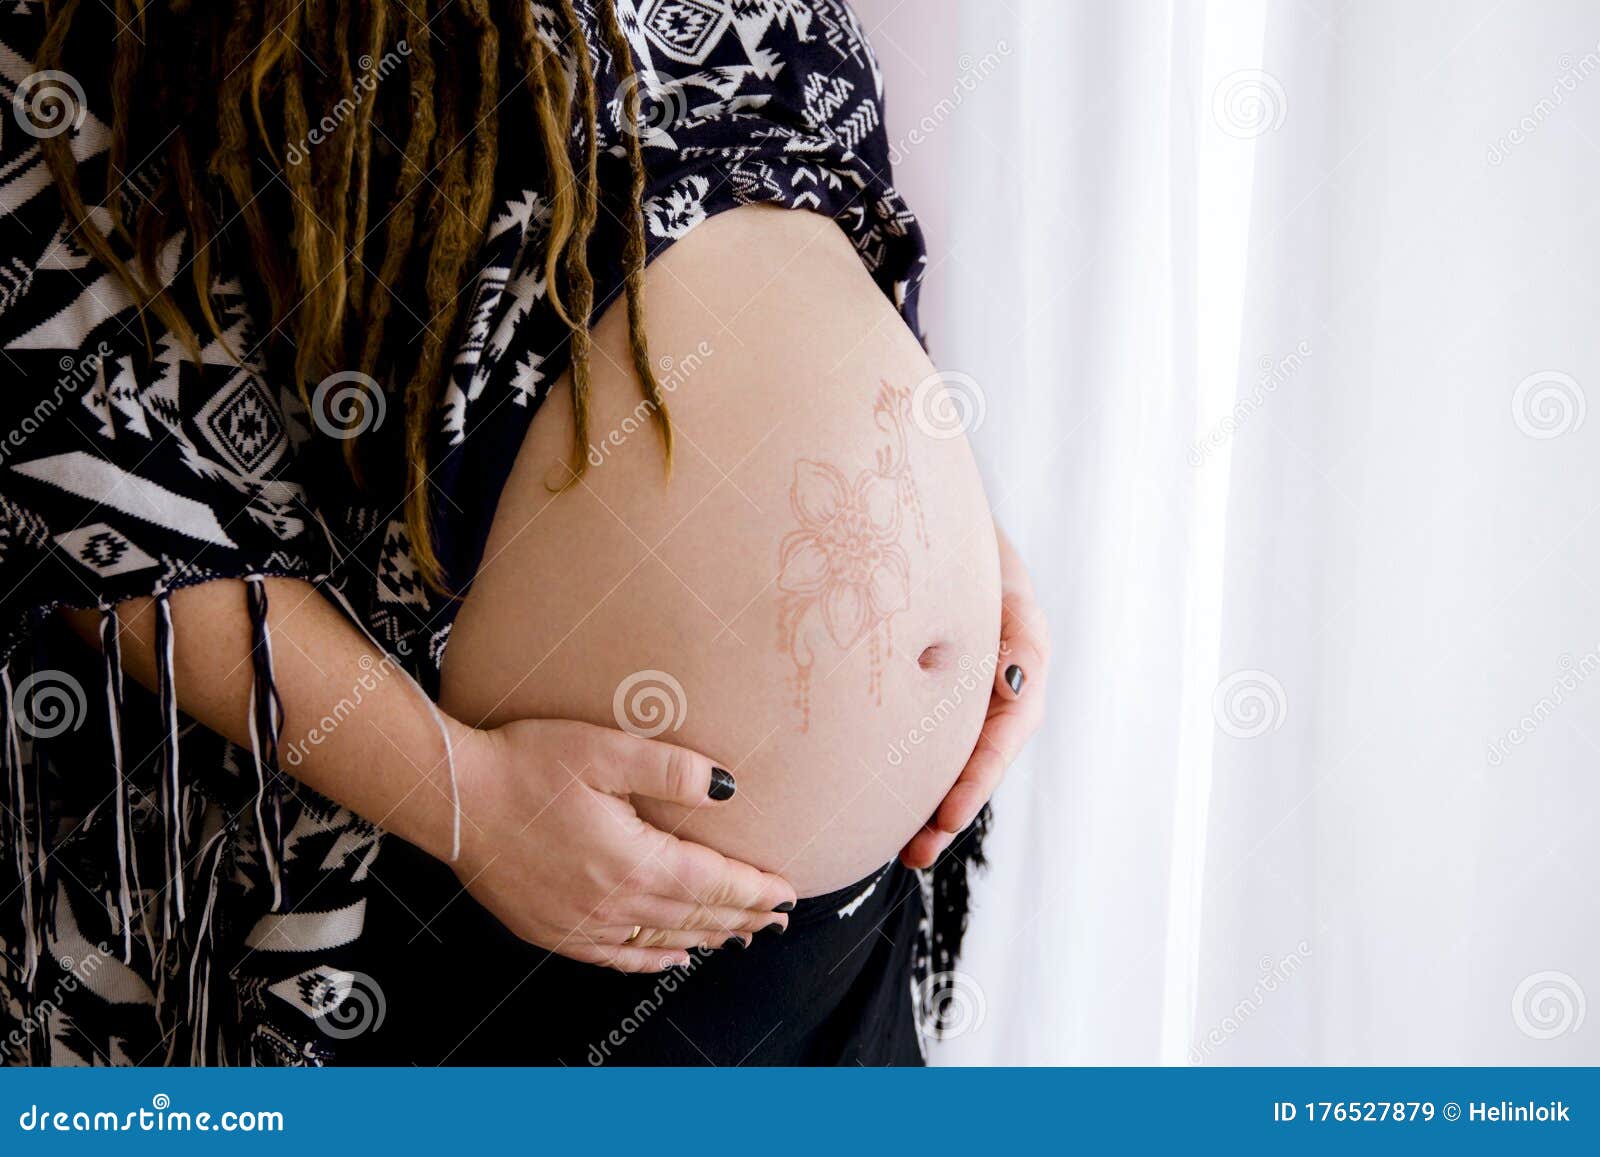 Harmless Henna Floral Drawing Art on Boho Pregnant Woman Tummy, Beautiful  Maternity Concept. Stock Image - Image of hold, expectant: 176527879